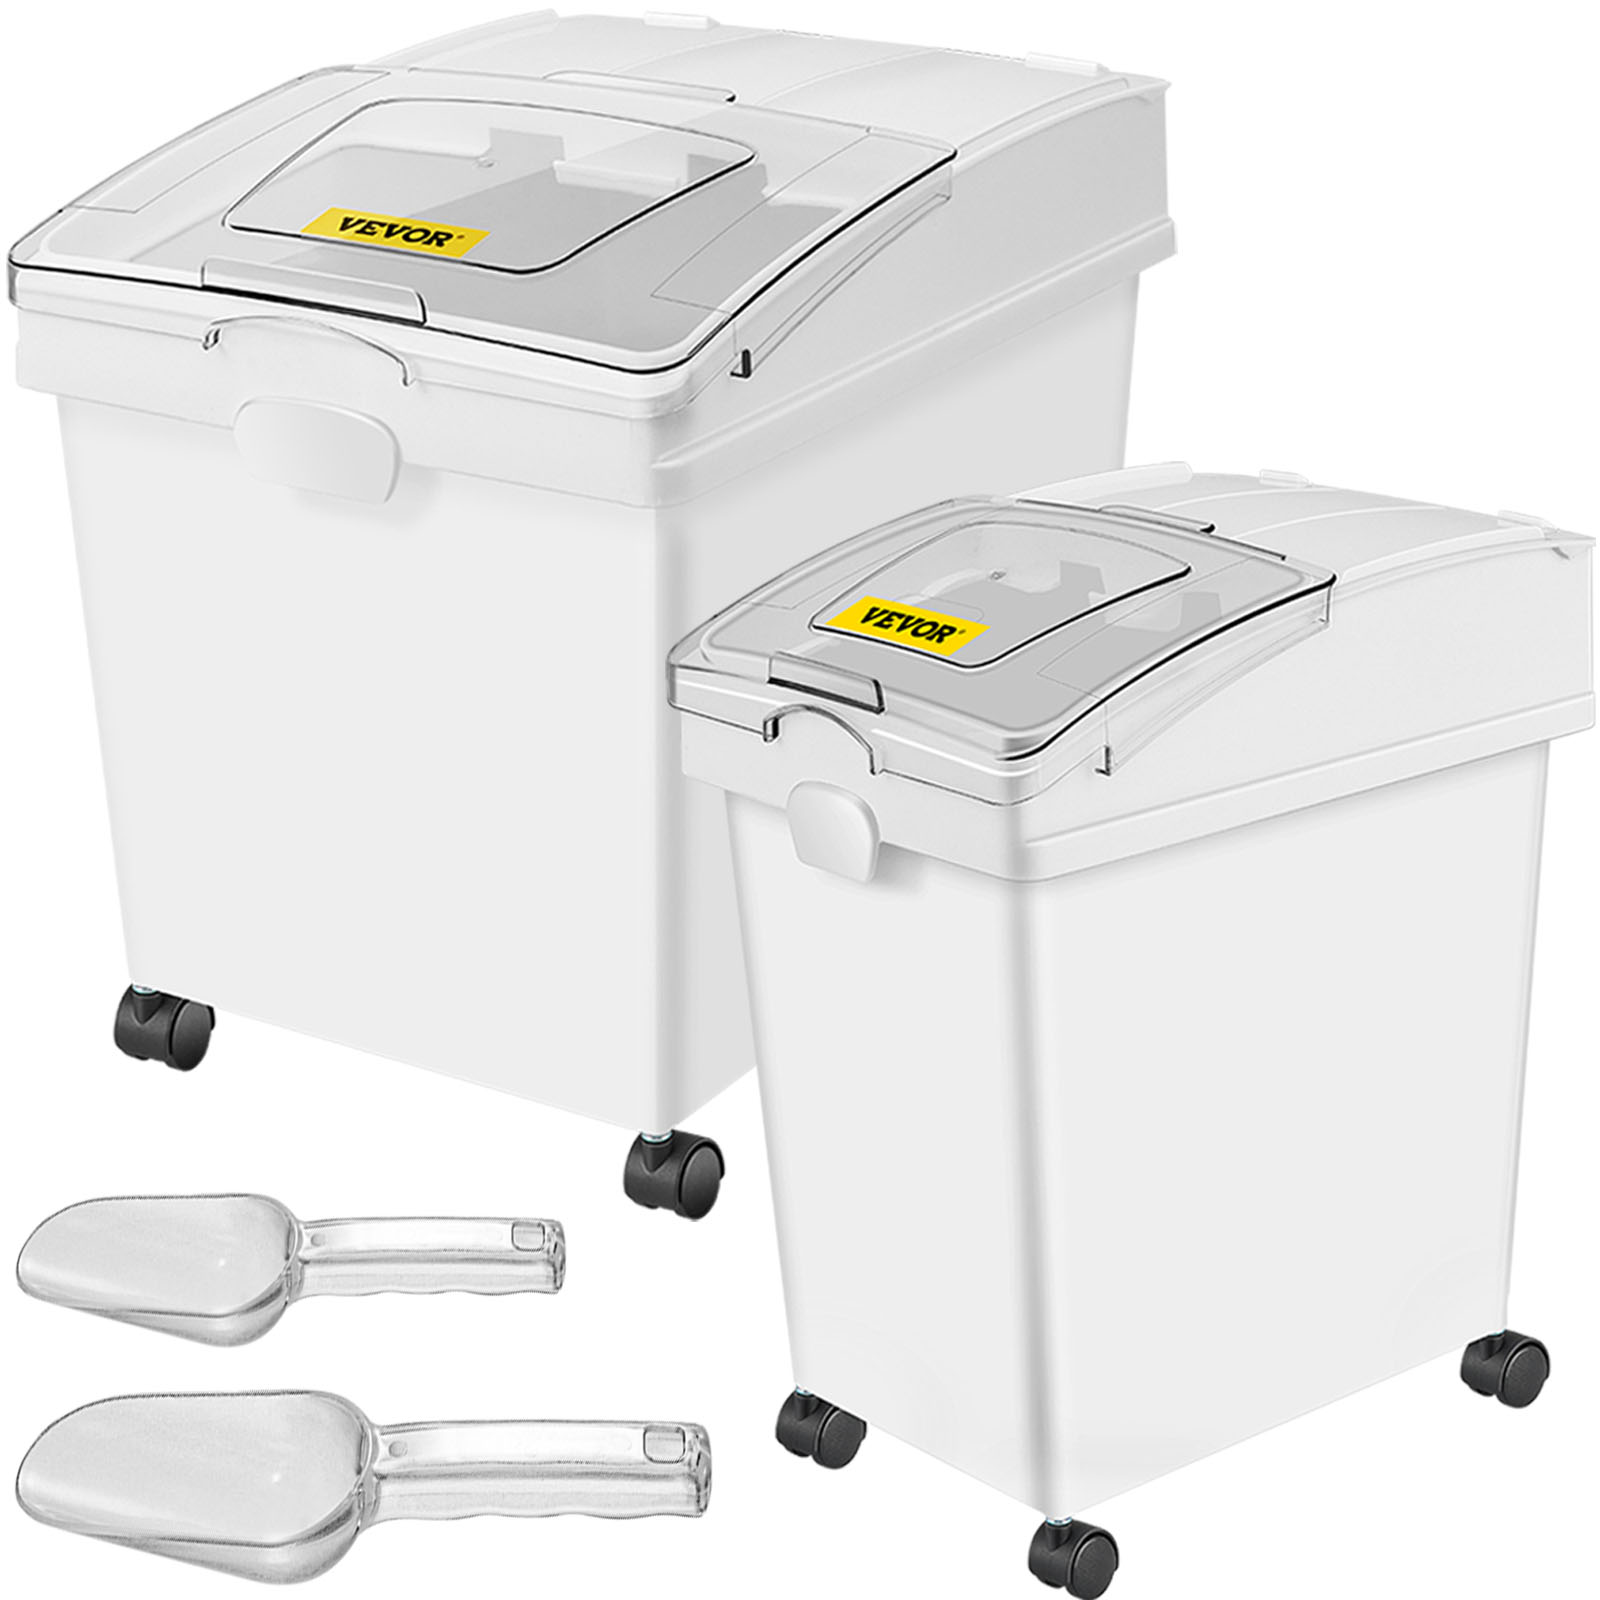 Recycle Cart for 400 Plus lbs. for Moving Recycle Bins (Single Pack)